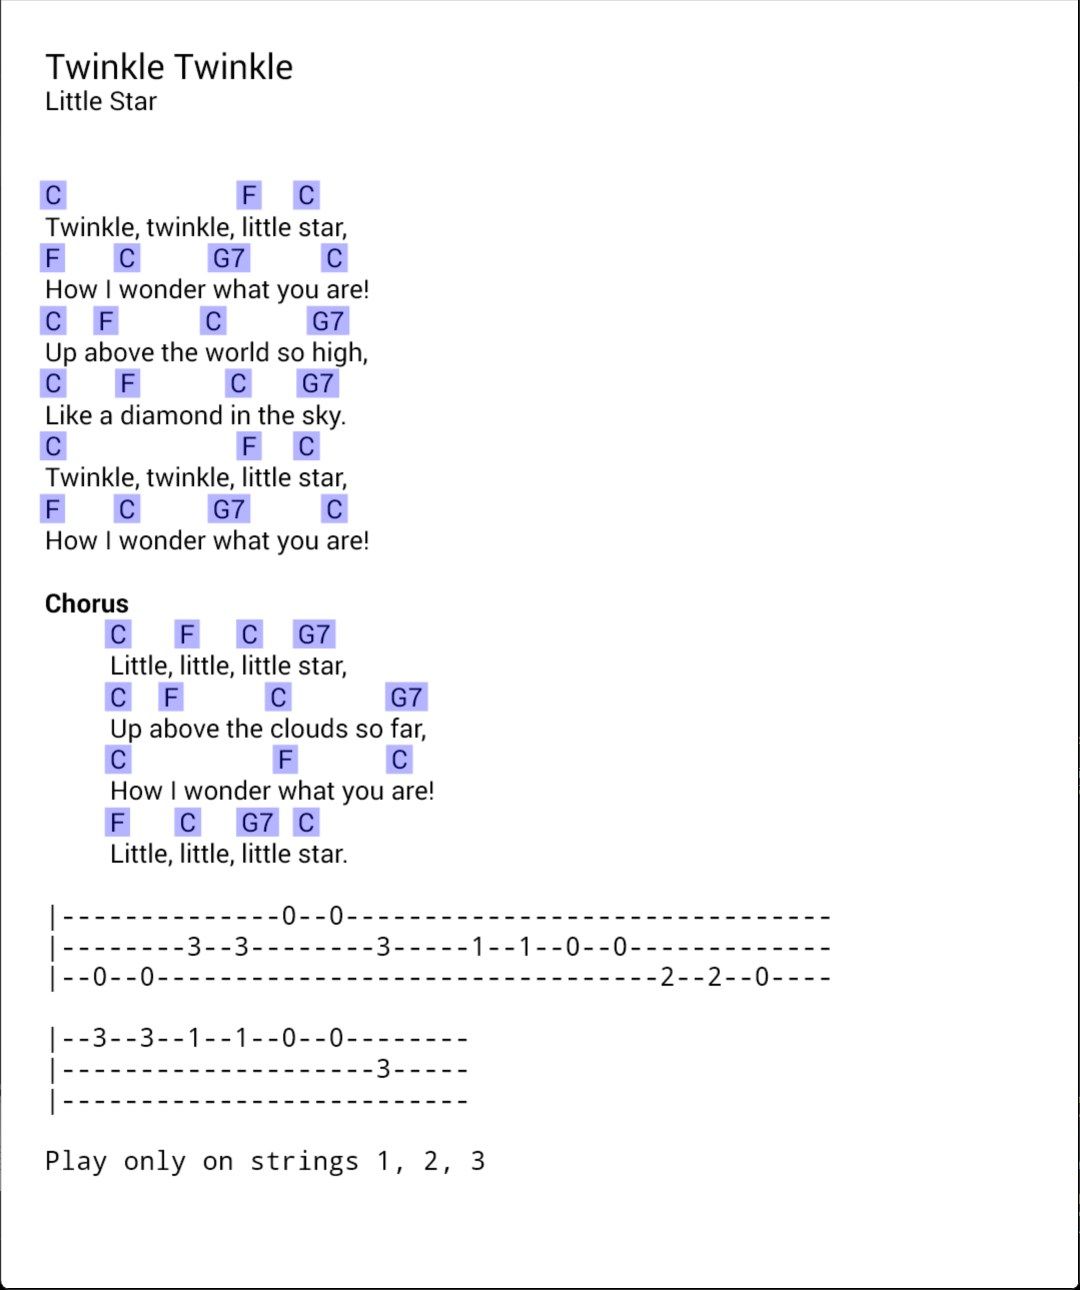 Display text and chord pro files with a large number of settings to control how they are displayed.